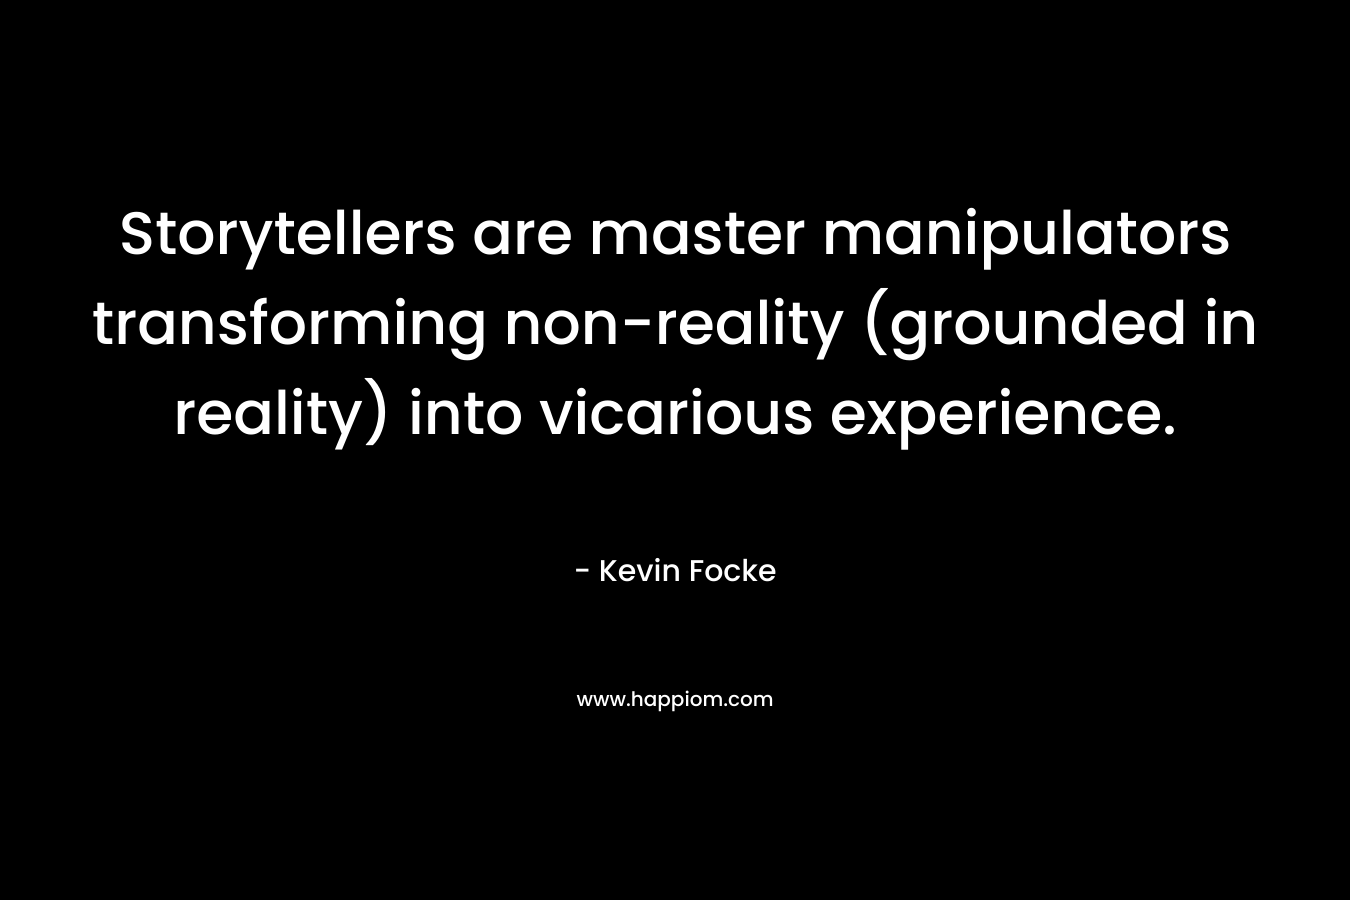 Storytellers are master manipulators transforming non-reality (grounded in reality) into vicarious experience. – Kevin Focke